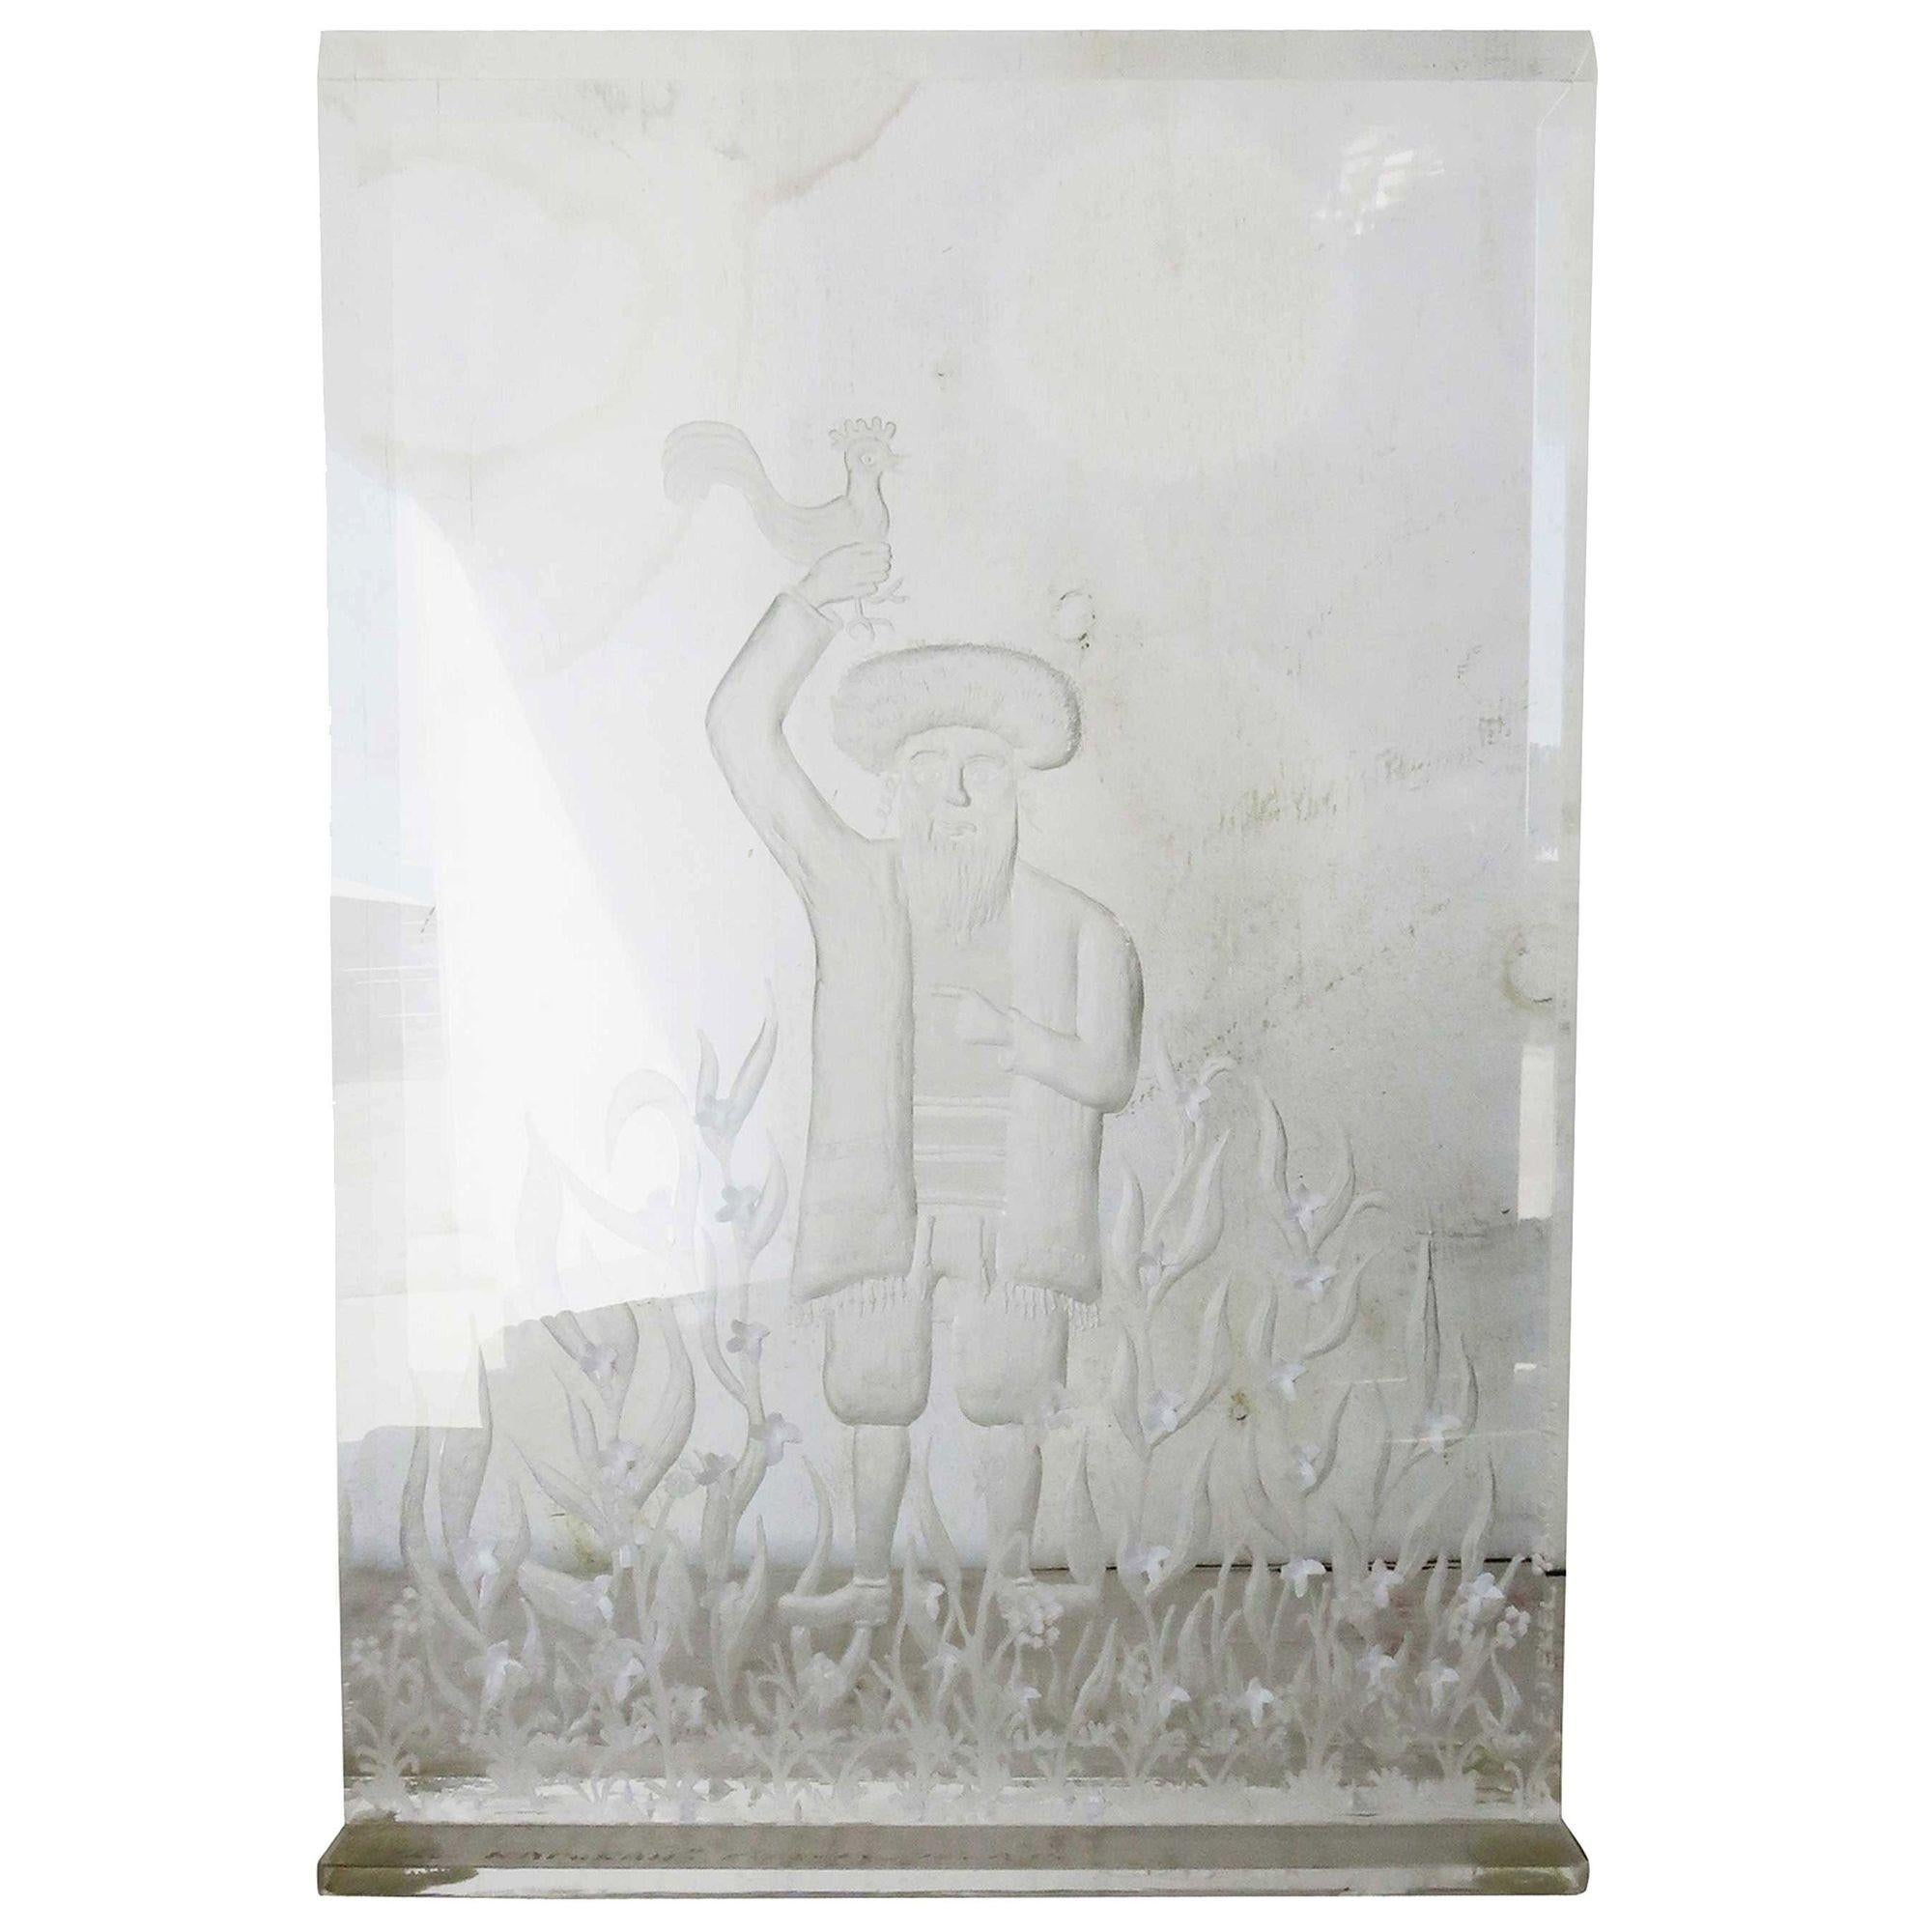 Hand-etched three-dimensional acrylic block art featuring a scene of a Jewish man practicing the ceremony of Kapparah on the holiday of Yom Kippur.

The 3d relief features several layers of etching with a detailing of foliage etched along the